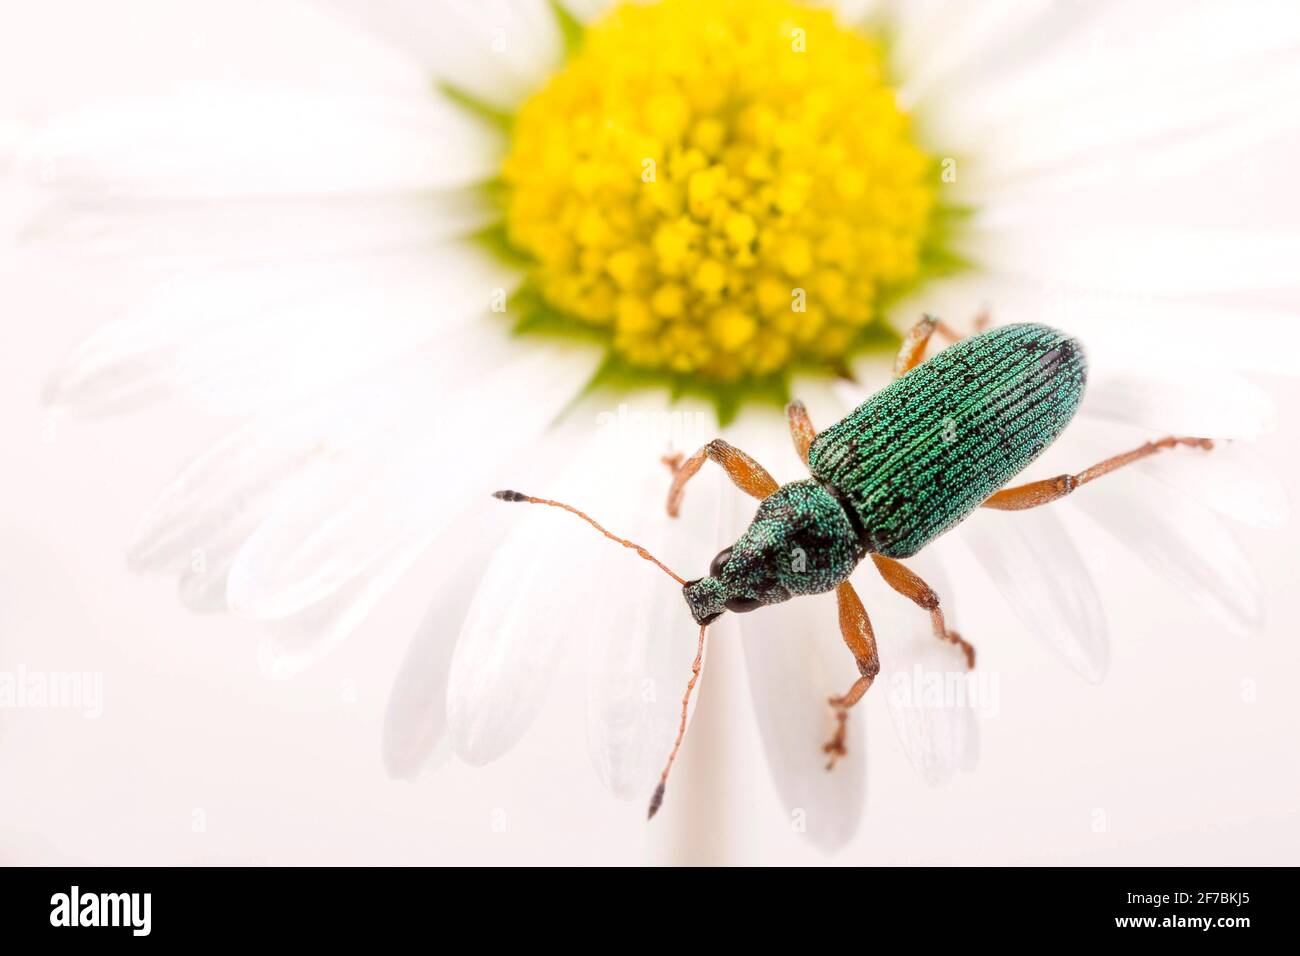 broad-nosed weevil (Polydrusus formosus, Polydrusus sericeus), sits on a daisy, Austria Stock Photo